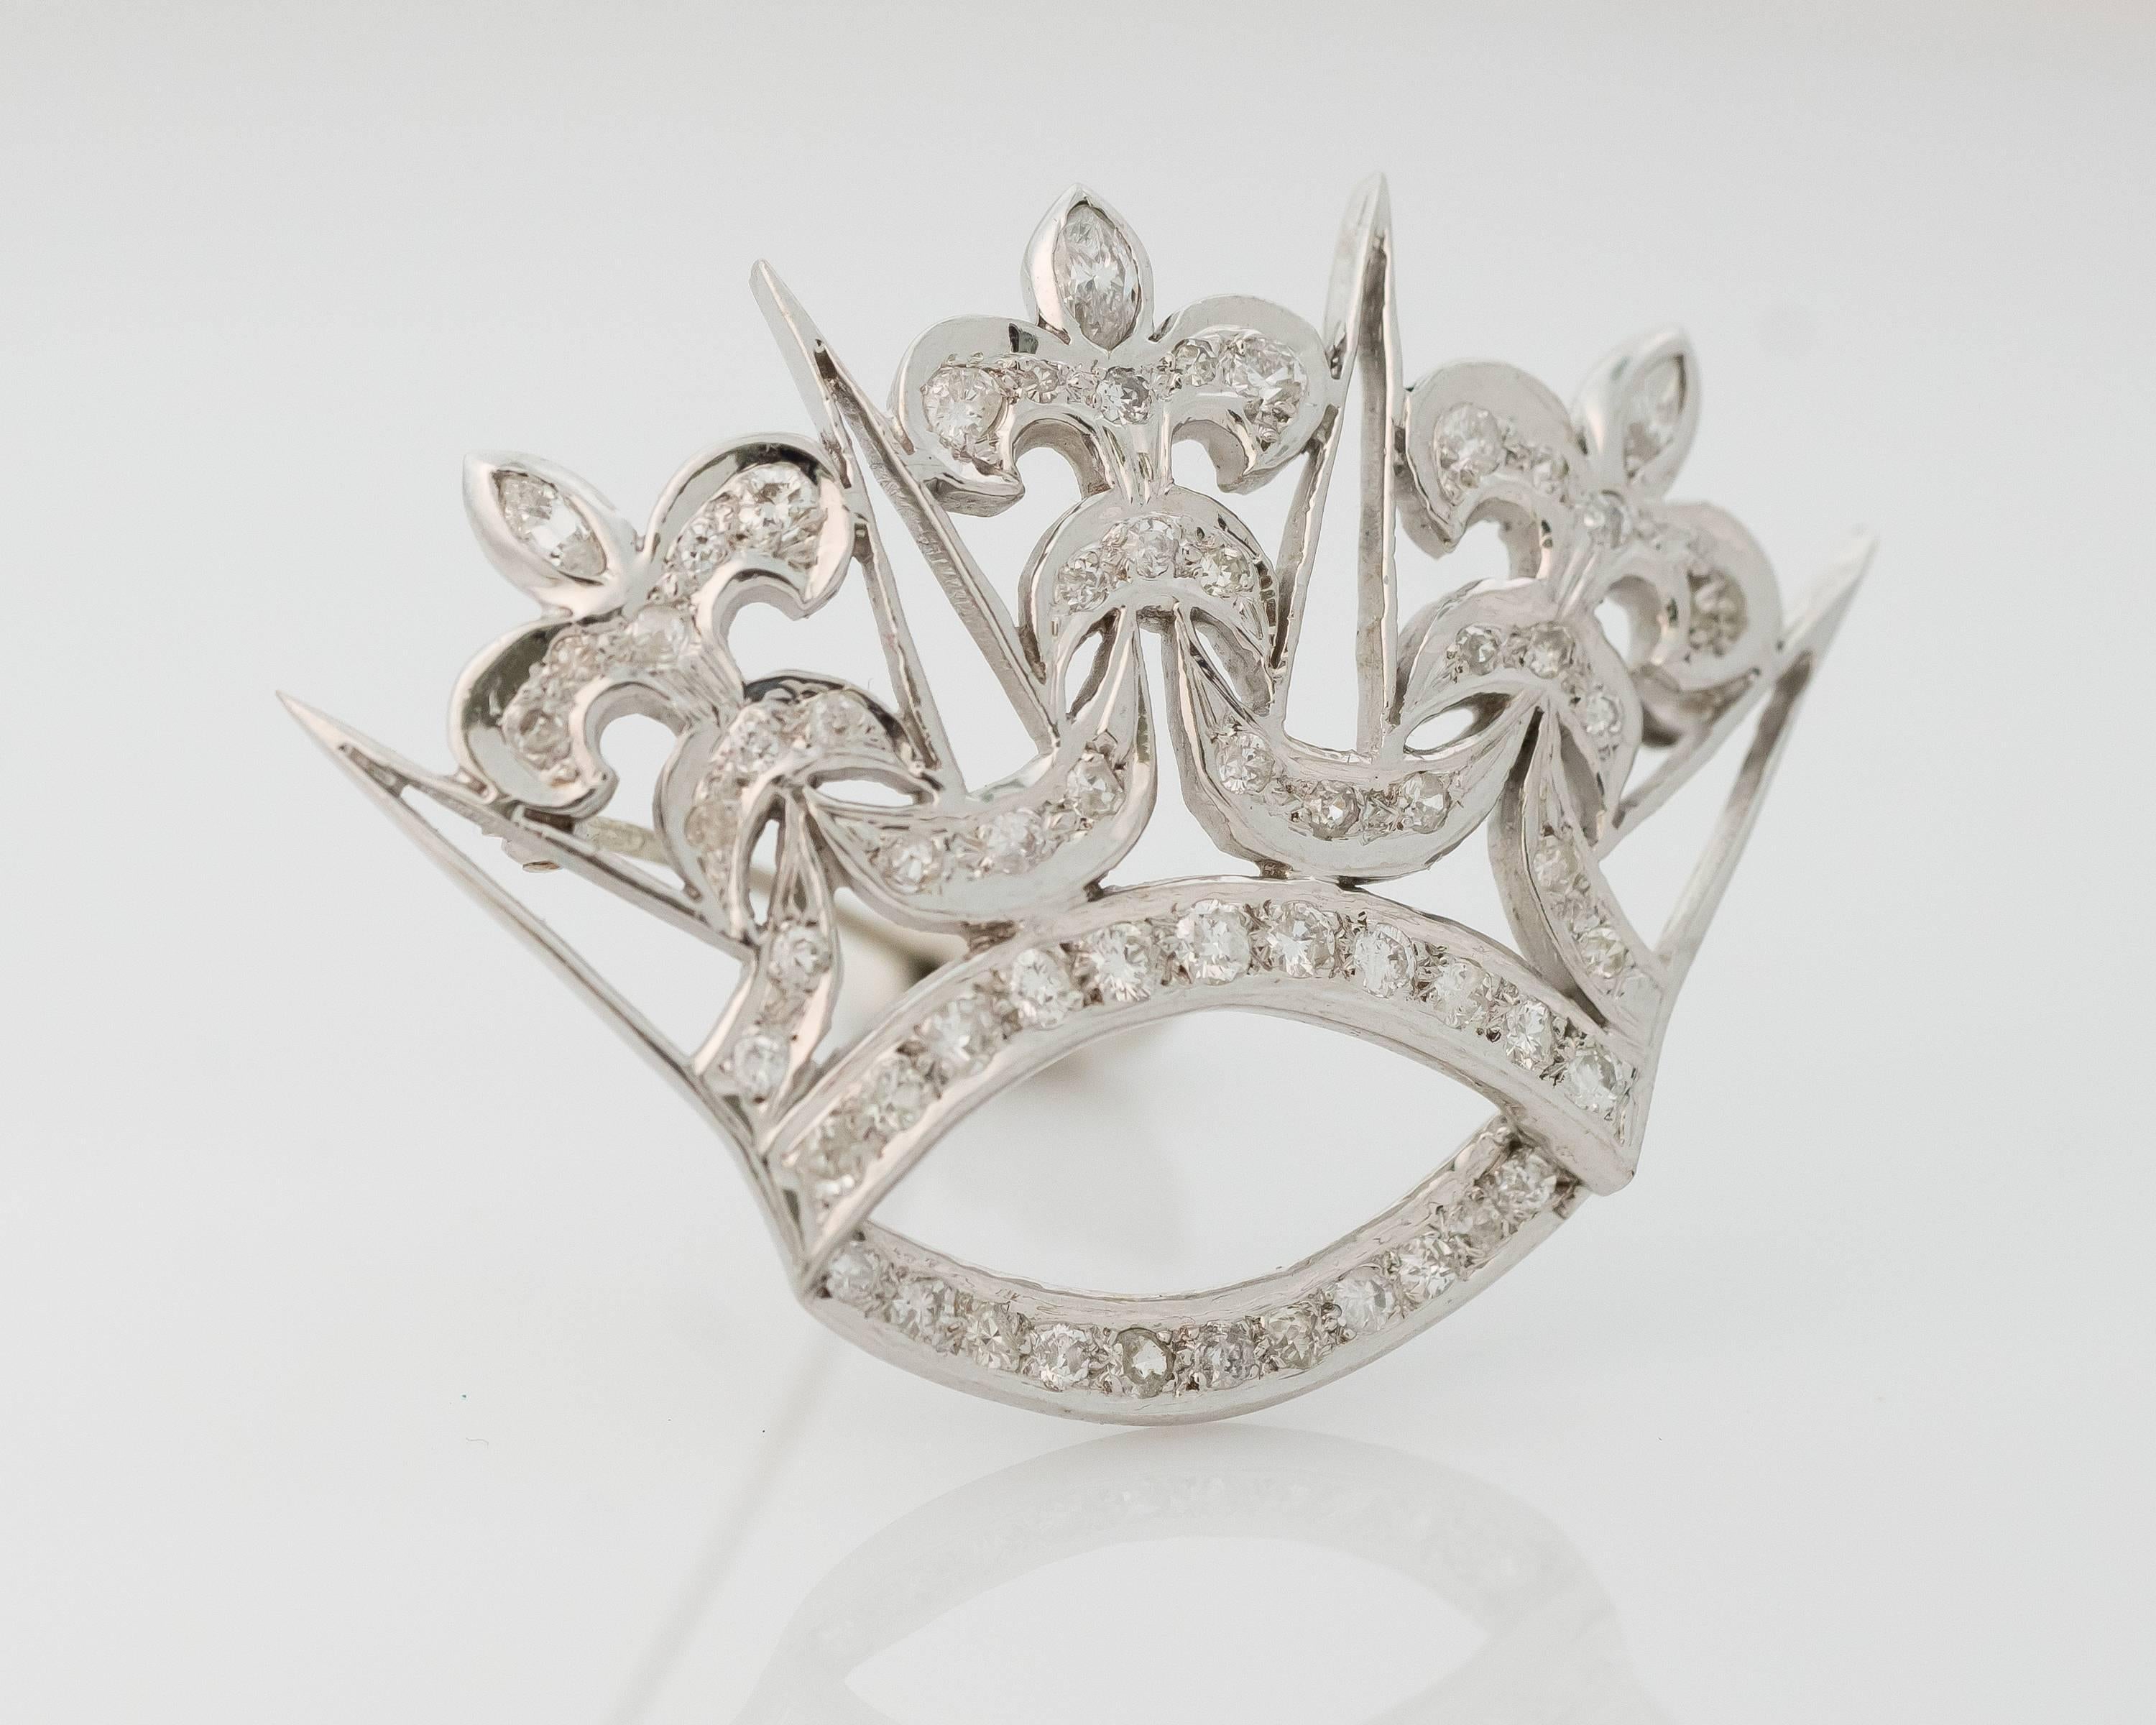 This 1930s Art Deco Diamond Crown Convertible Brooch features 1.00 total carats of single cut and marquise diamonds set in 14 karat white gold. The crown measures 1.75 inches wide by 1.25 inches long and has a fixed bail on the back to receive your